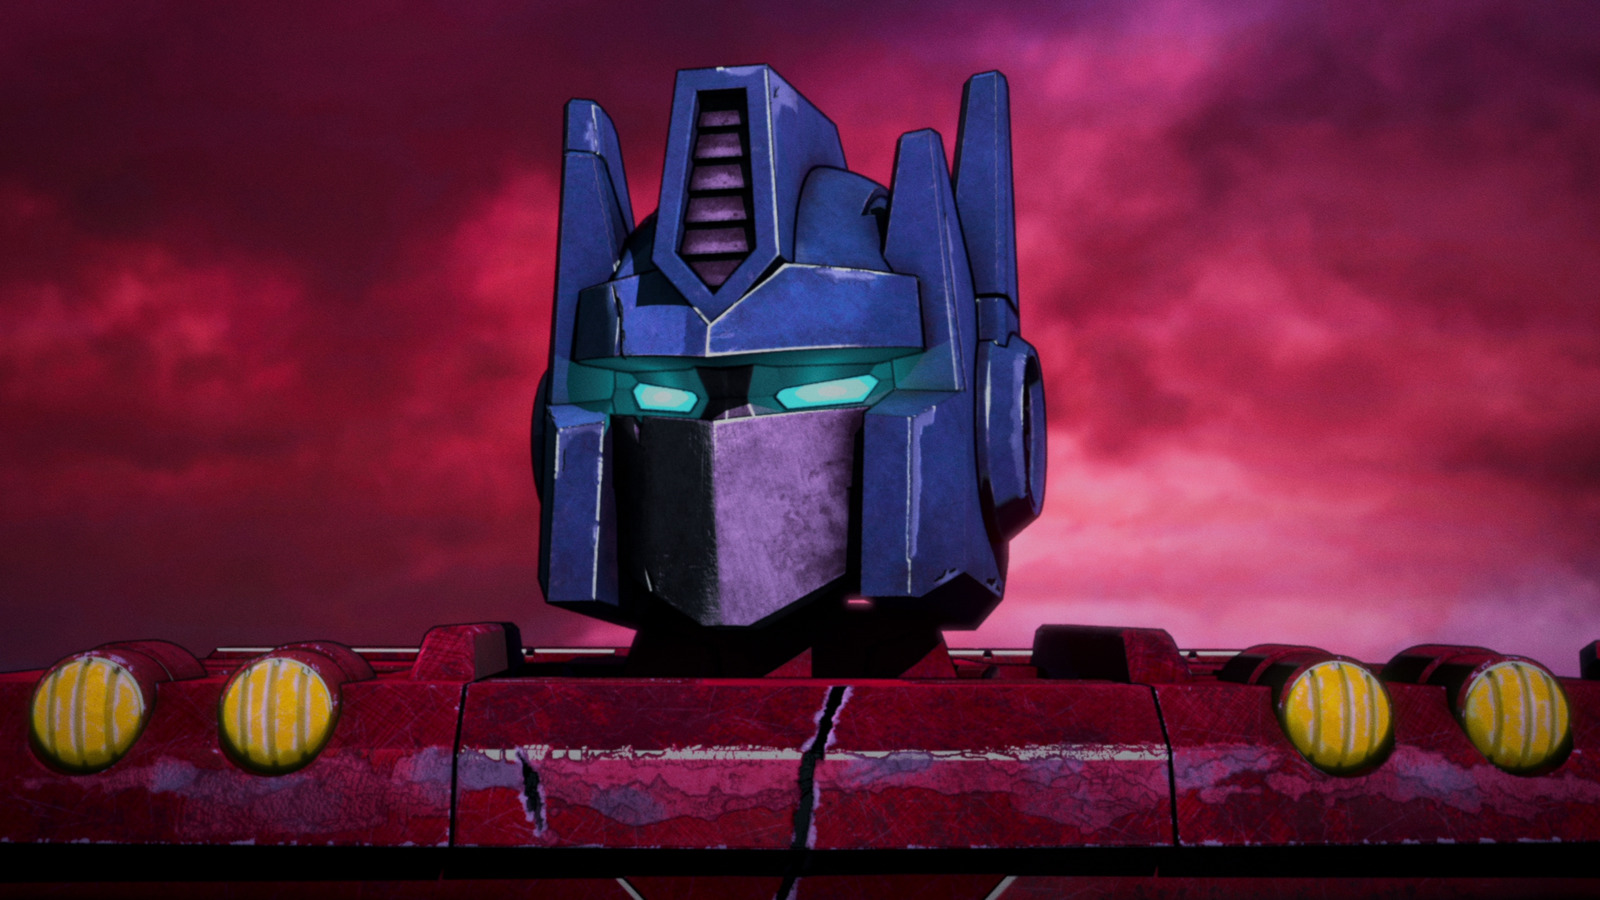 Transformers One Release Date, Cast, Director And More Info